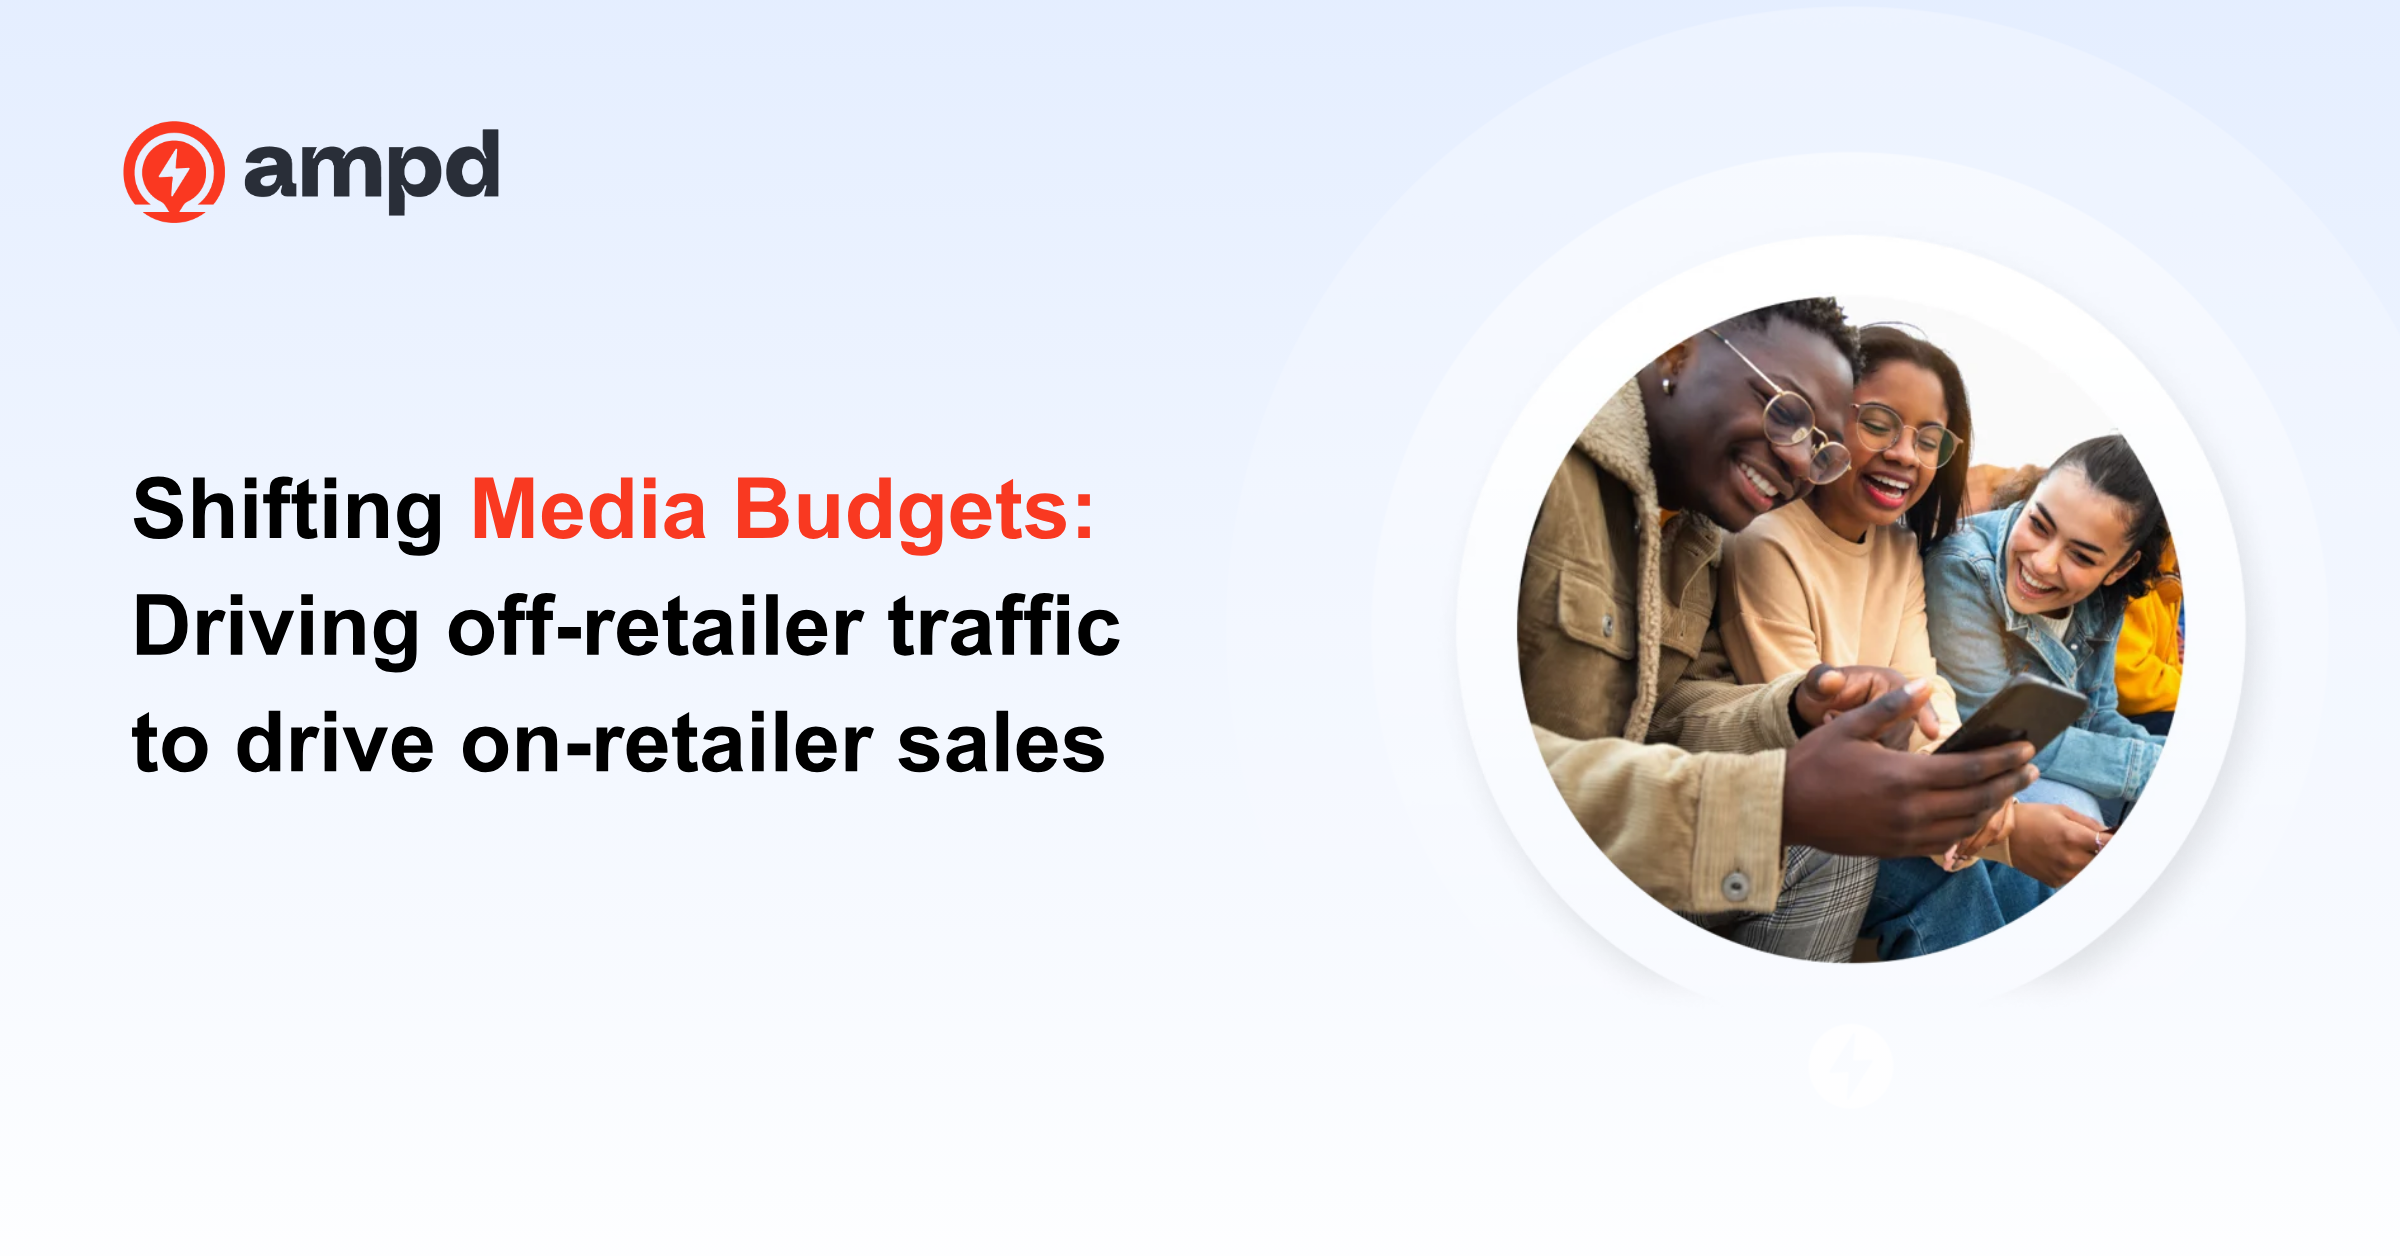 Shifting Media Budgets: Driving off-retailer traffic to drive on-retailer sales.